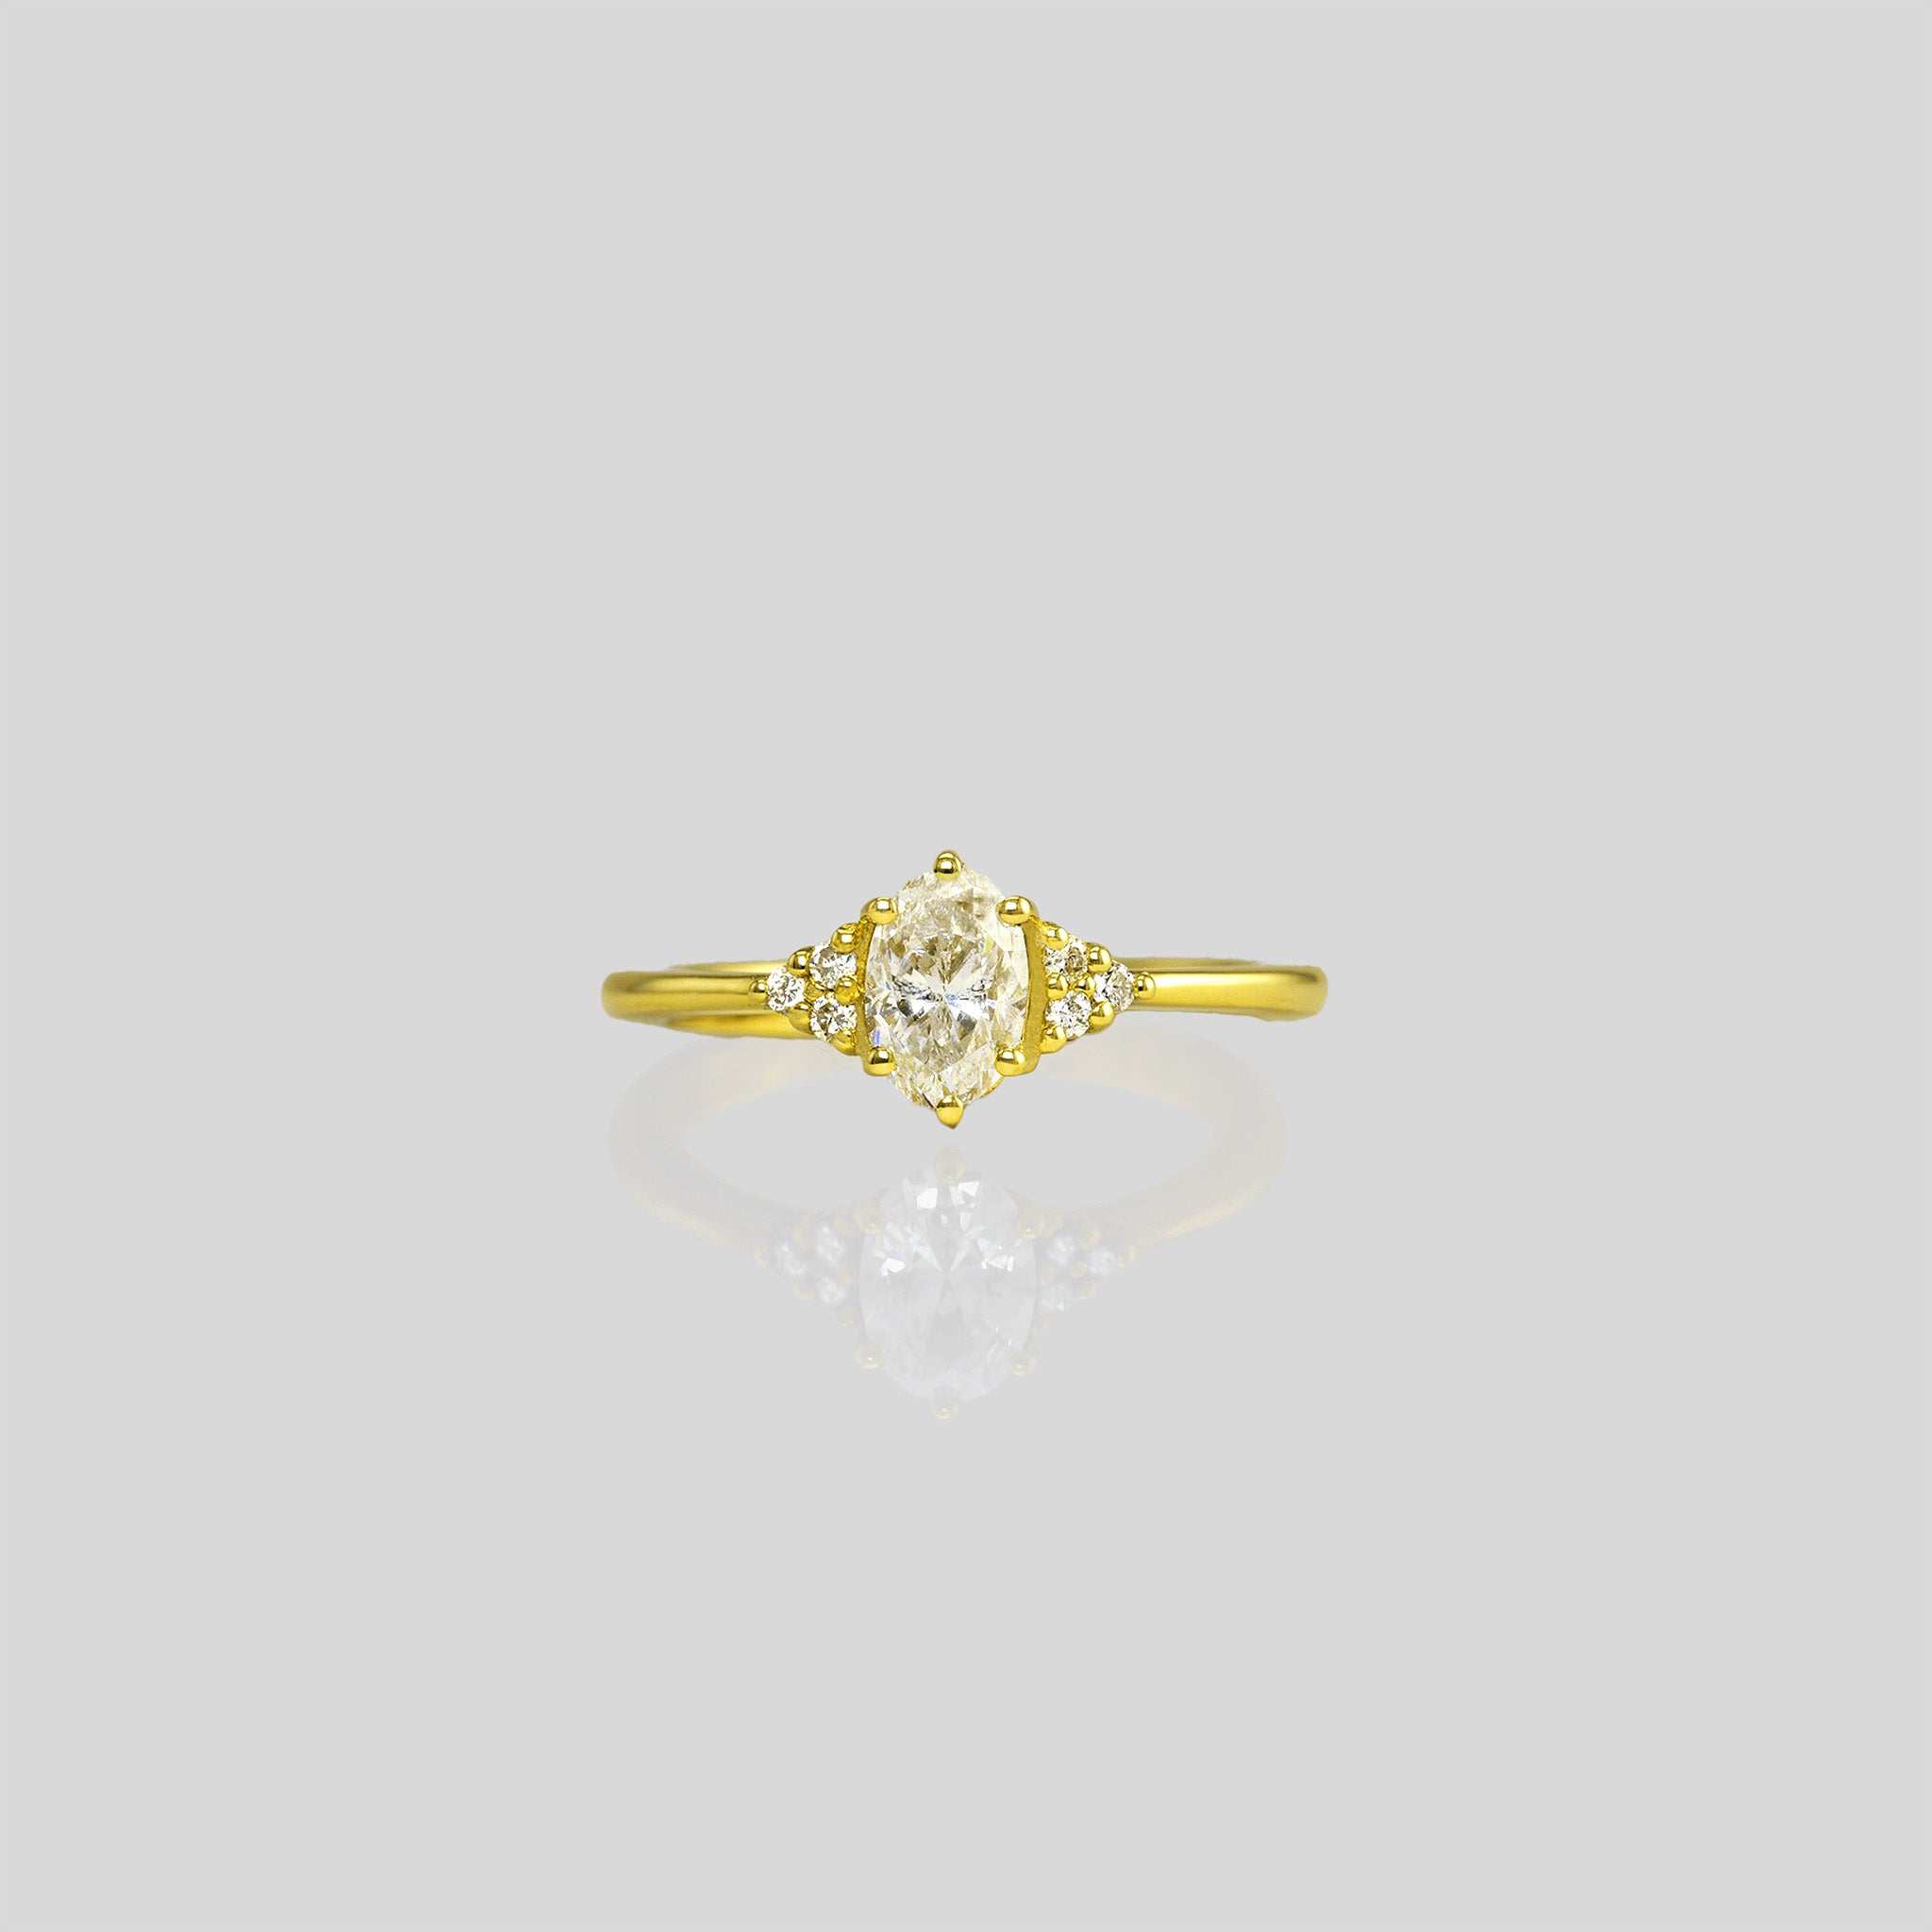 Front look of our timeless Classic Gold Engagement Ring. Delicately designed with an oval diamond surrounded by six smaller diamonds, it exudes elegance and charm, symbolizing everlasting love.